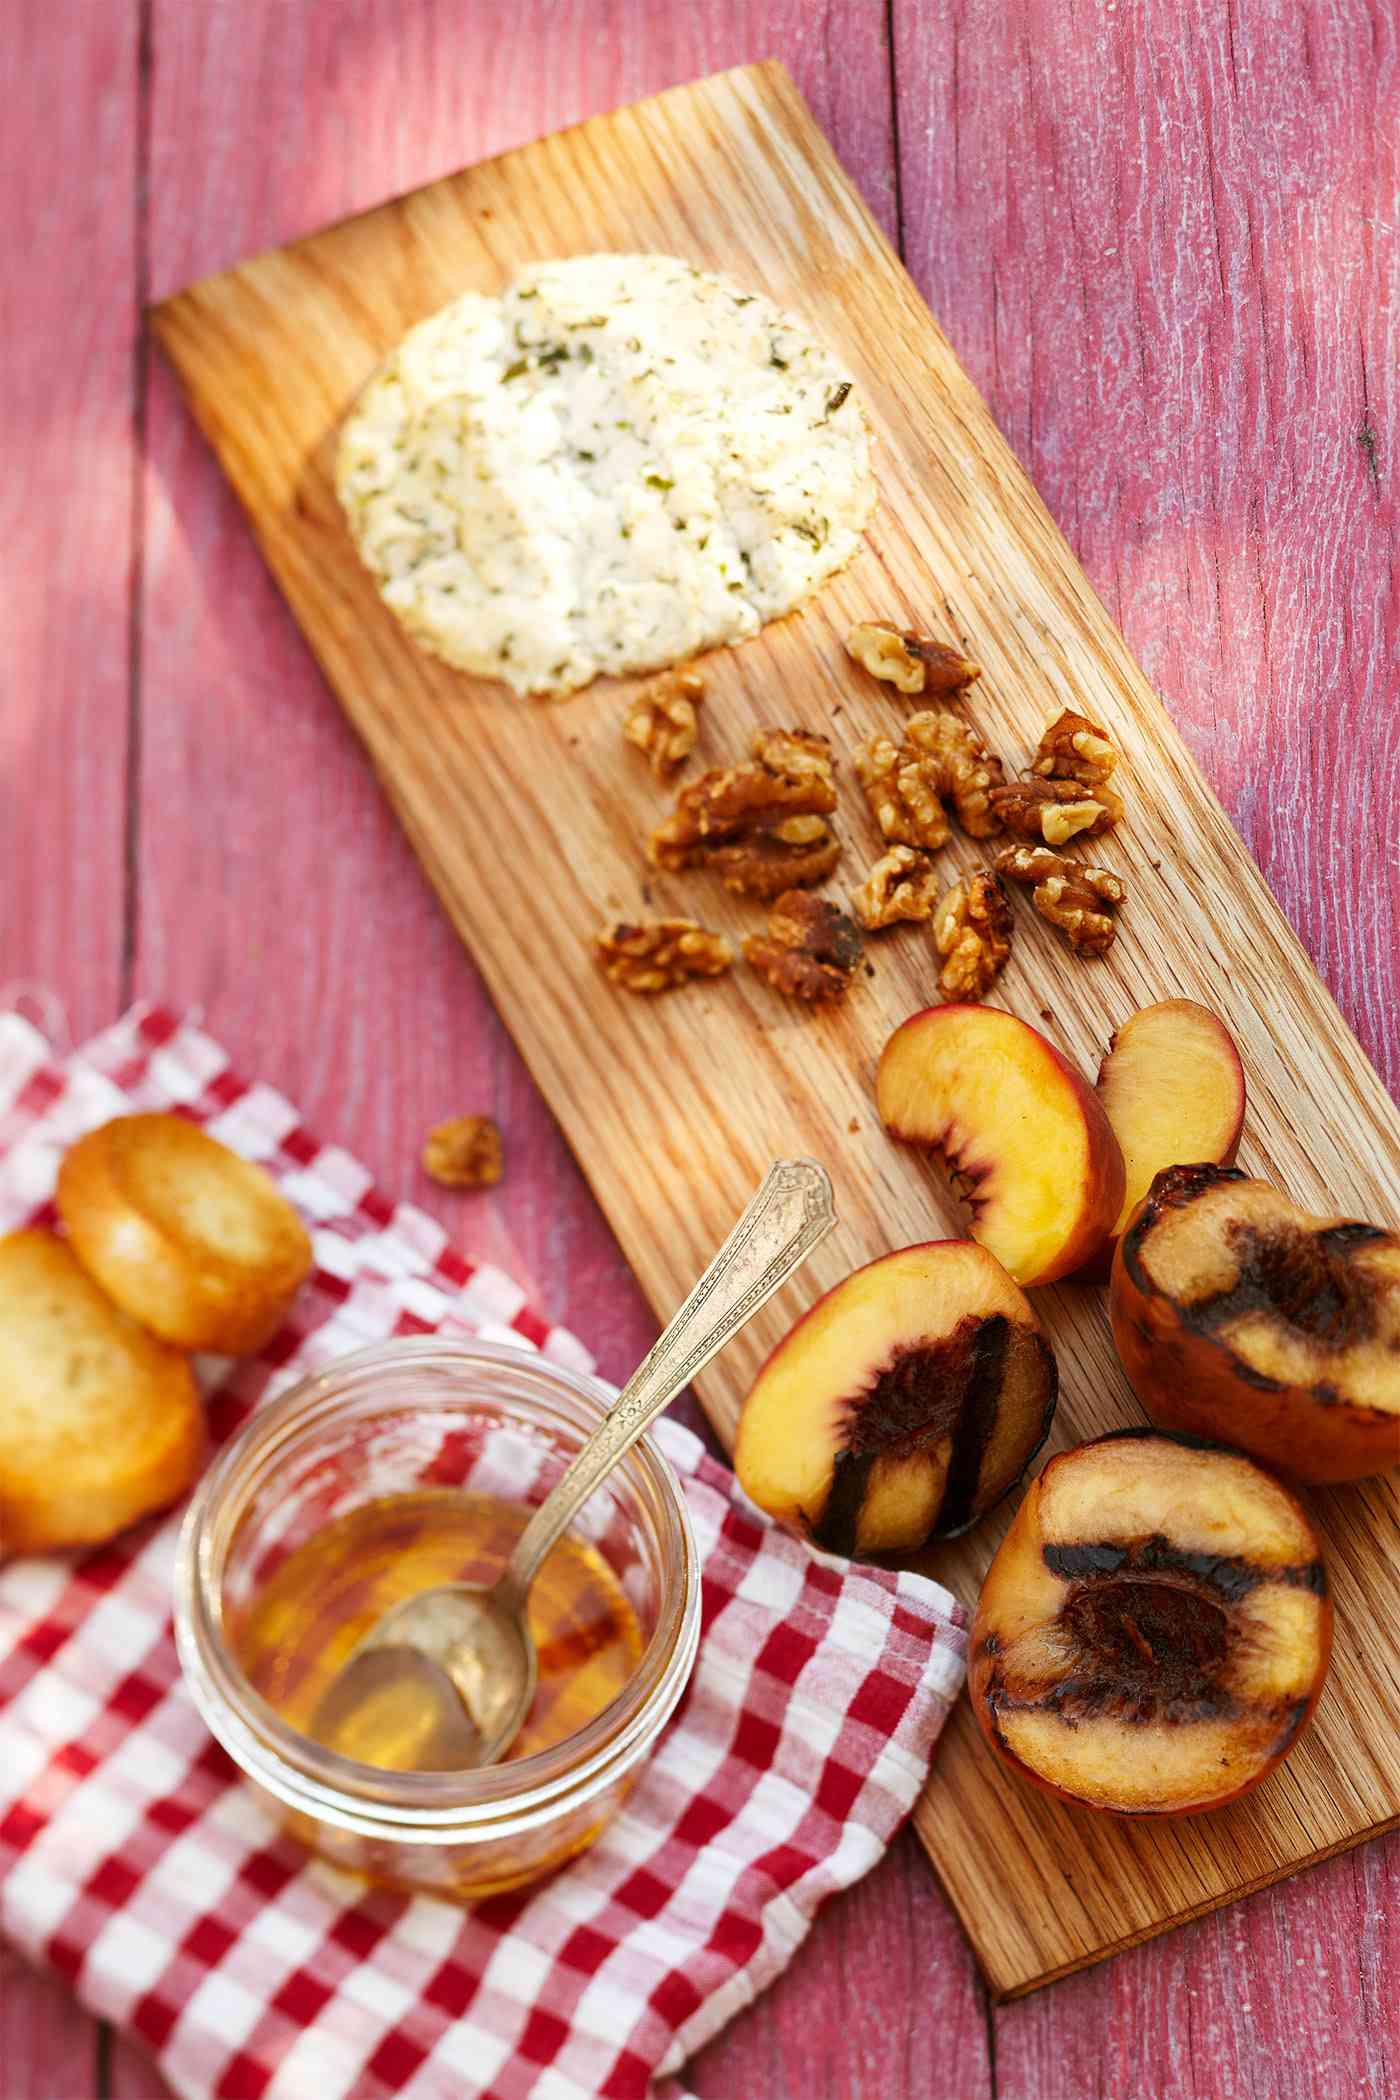 Plank-Smoked Peaches and Goat Cheese on wooden plank